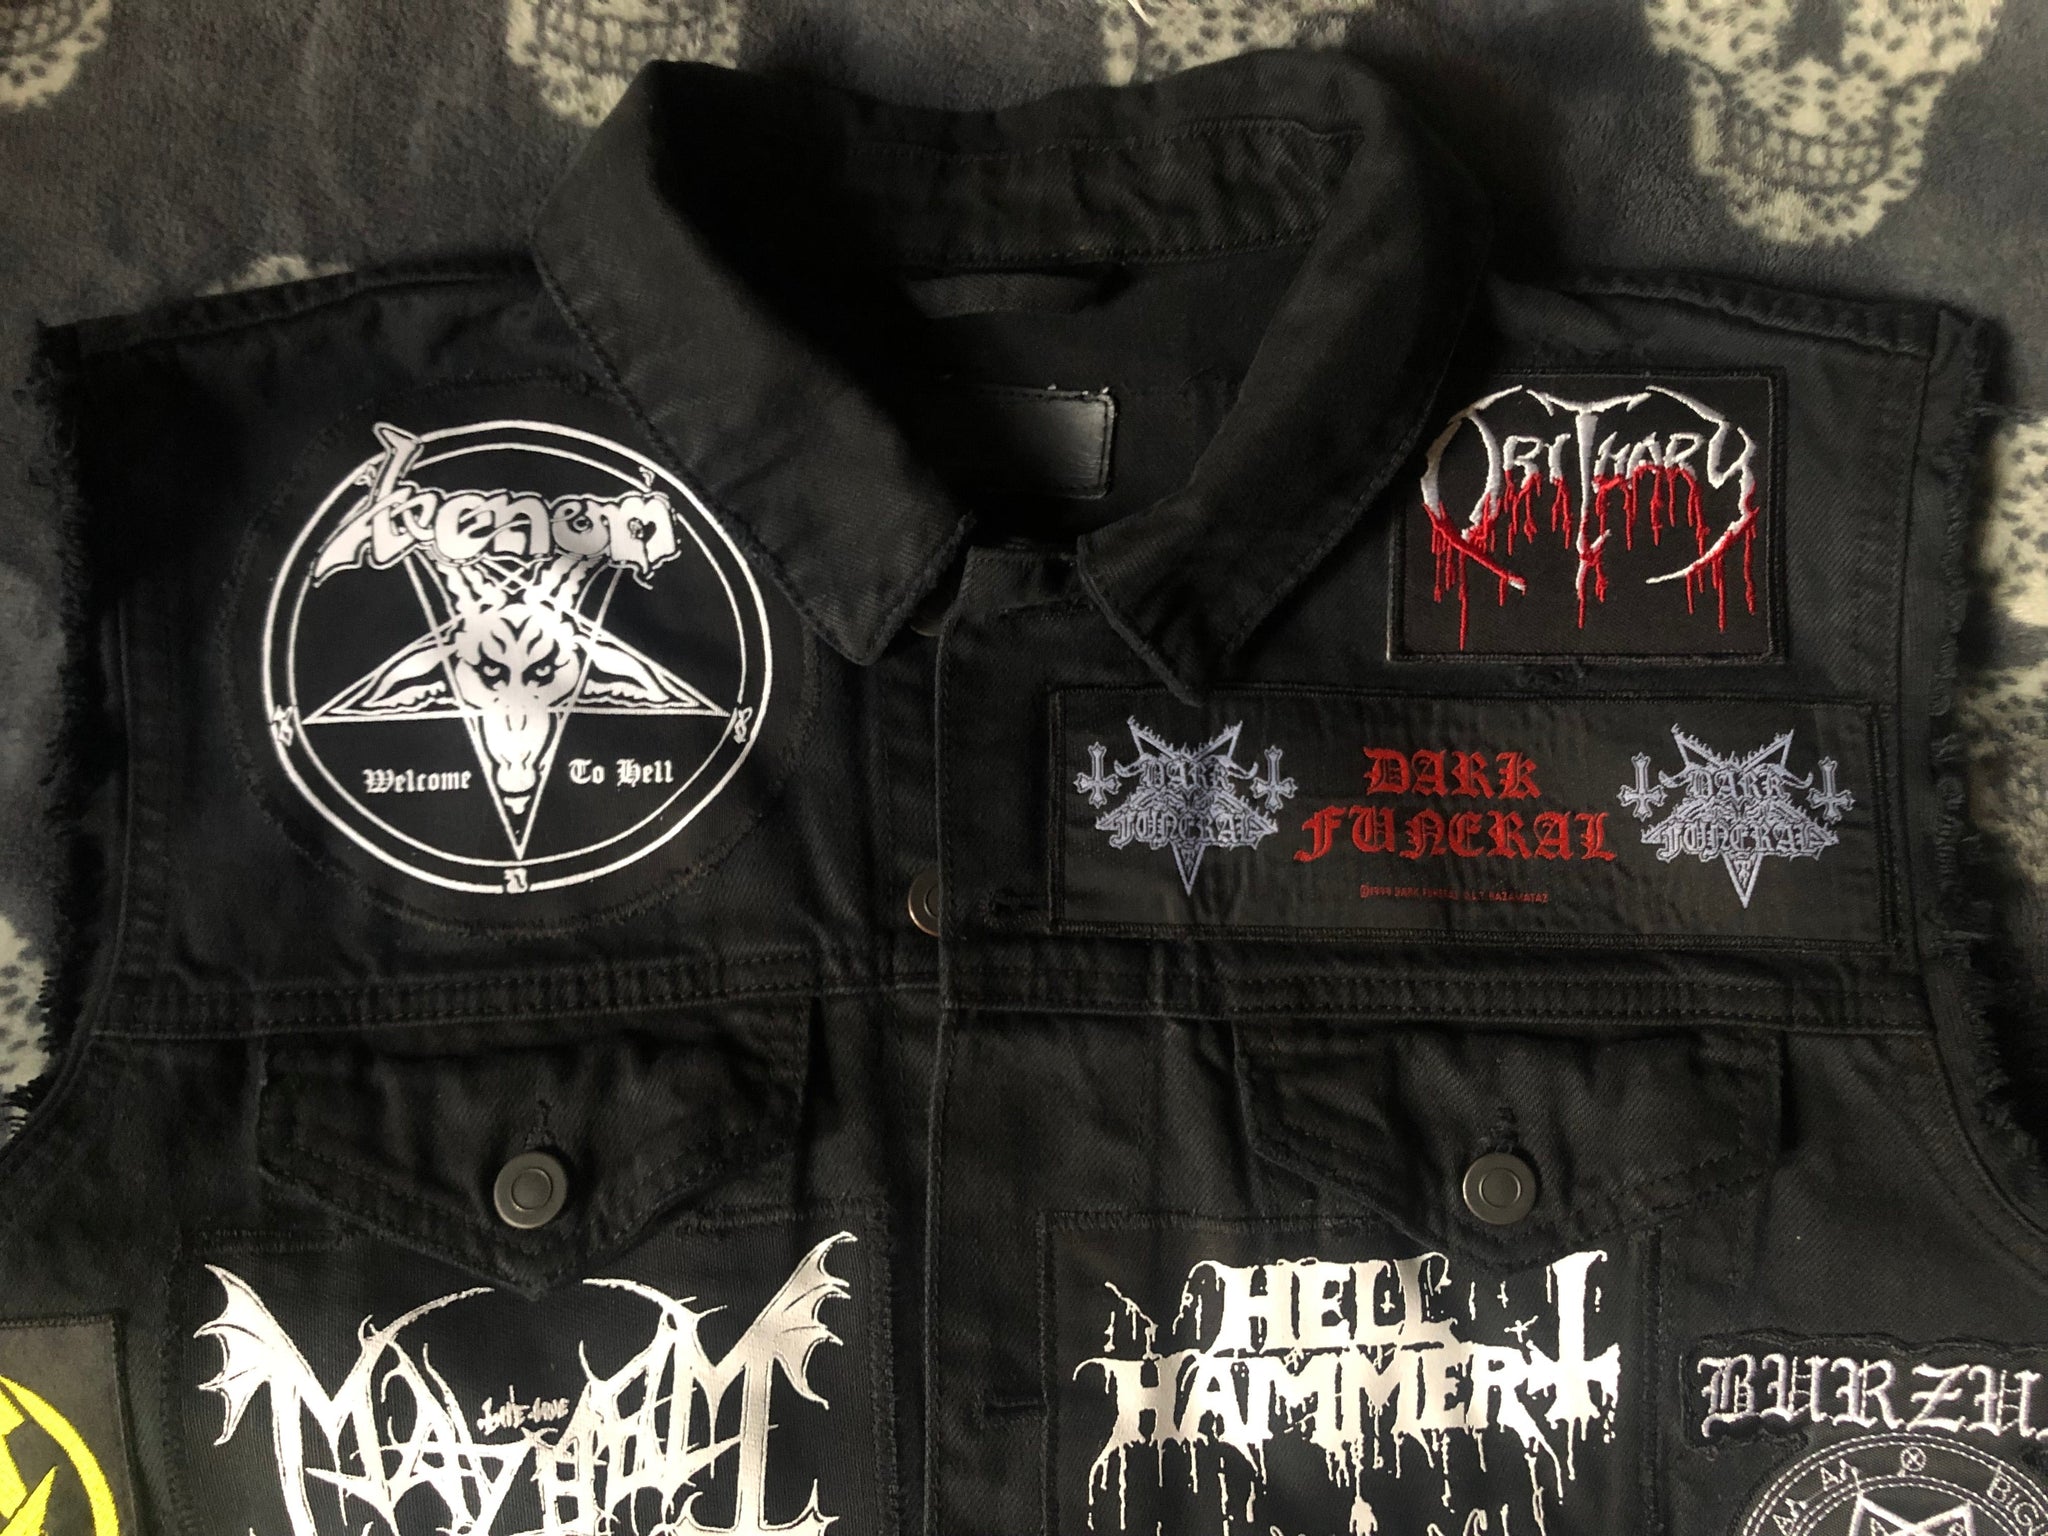 Large Back Patches for your Vest and Jackets